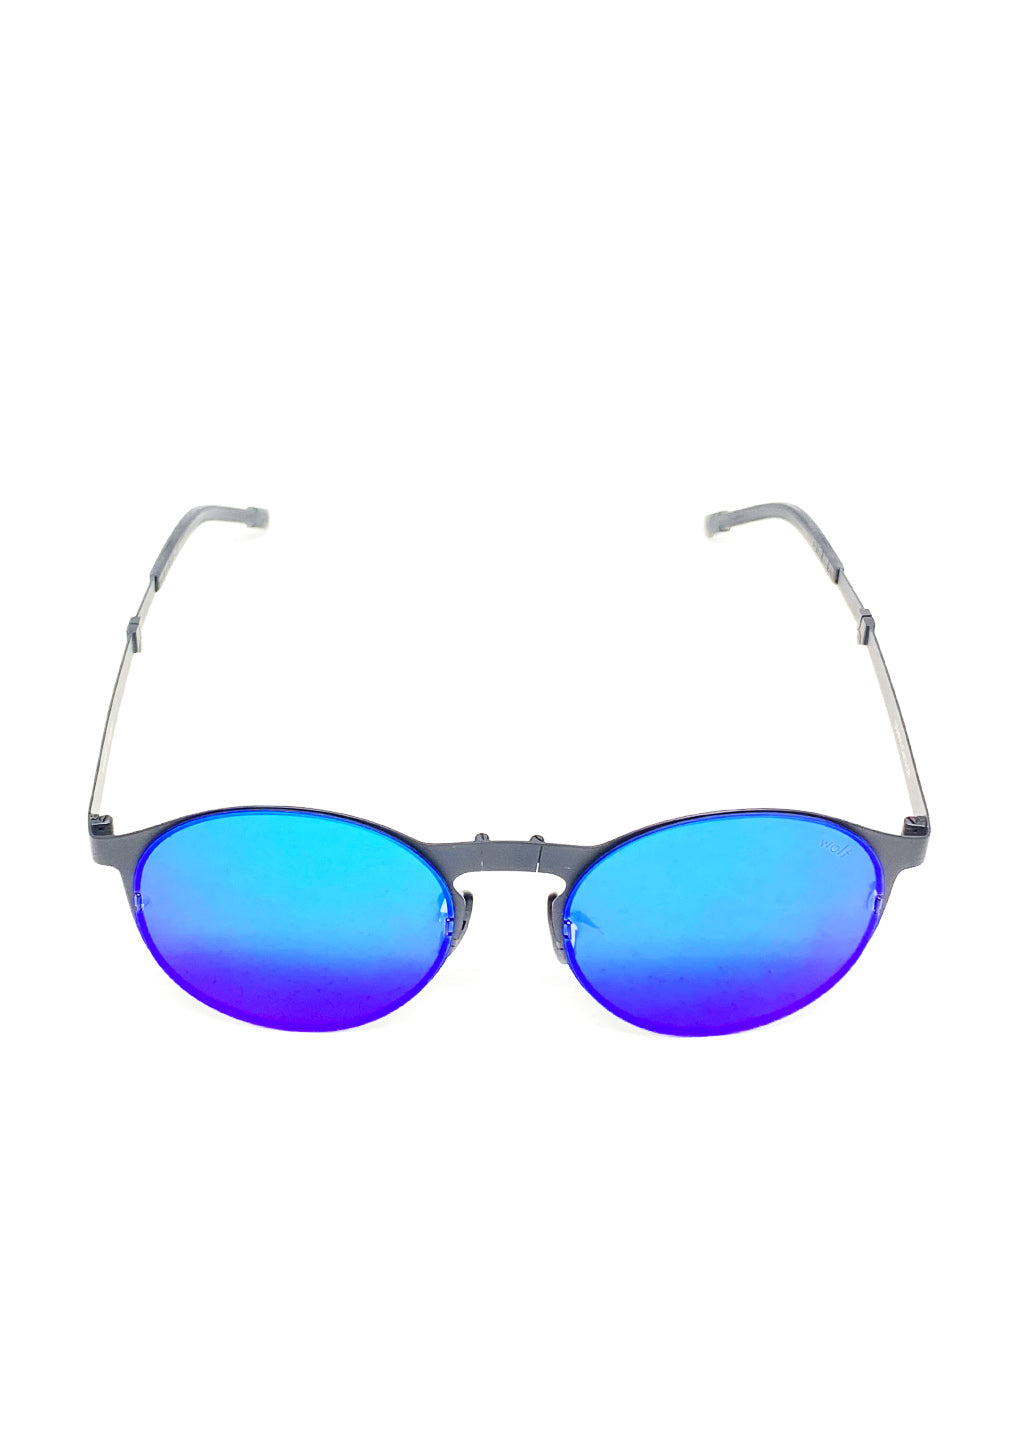 Foldable sunglasses - Looper classic round design - Front with blue lenses.